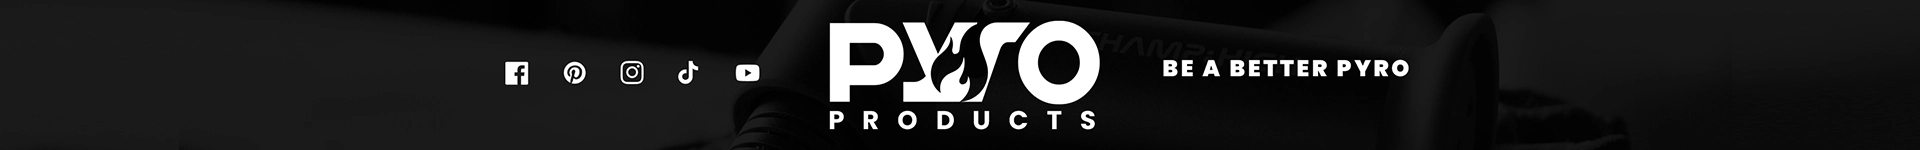 PyroProductss background